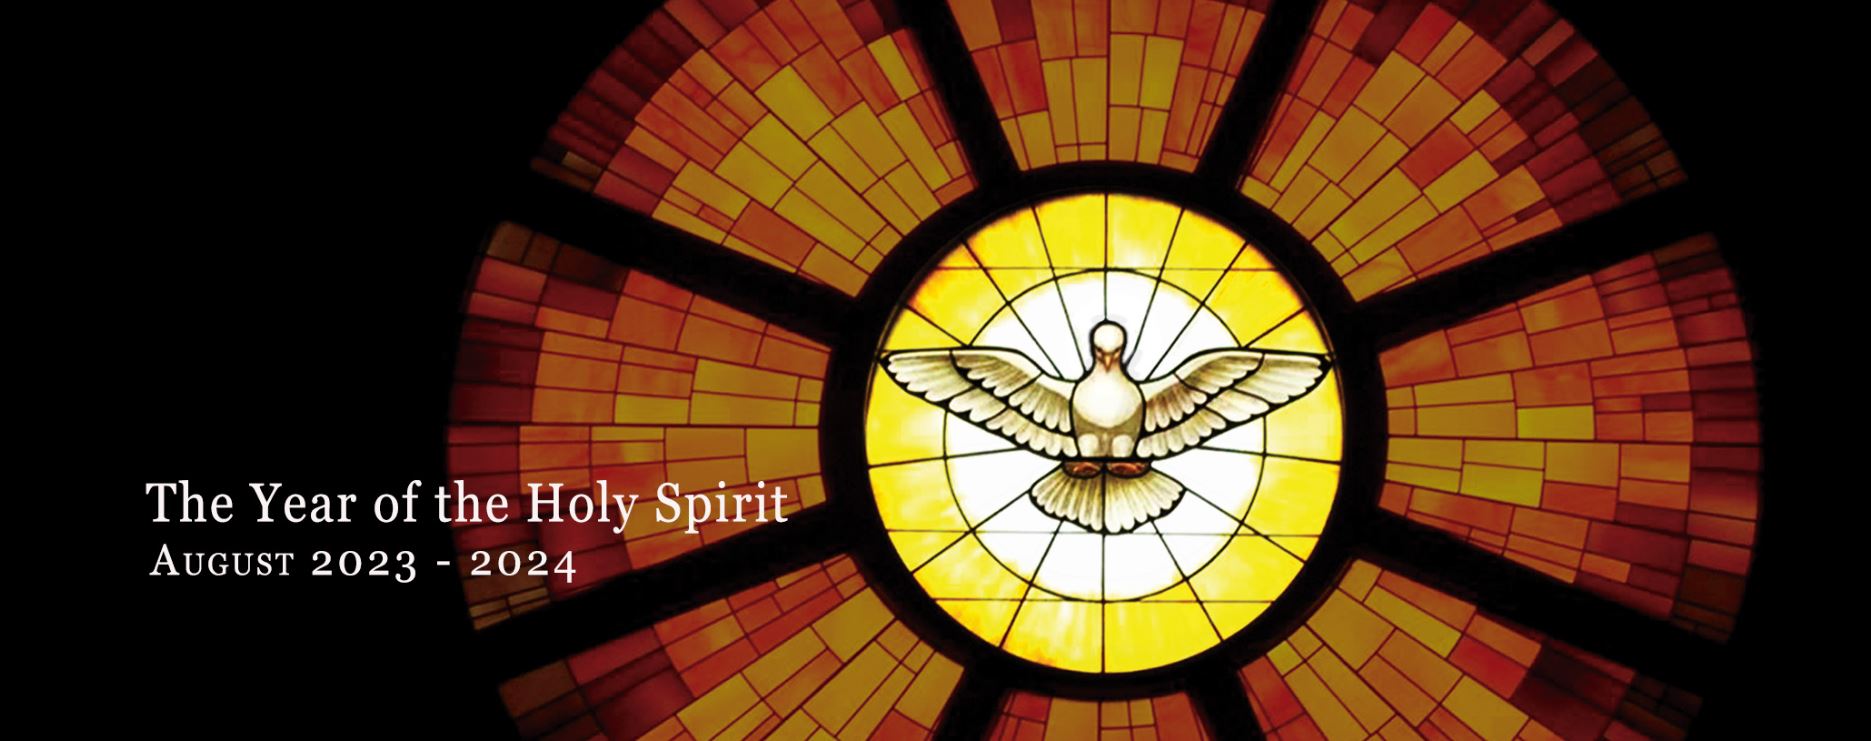 Year of the Holy Spirit